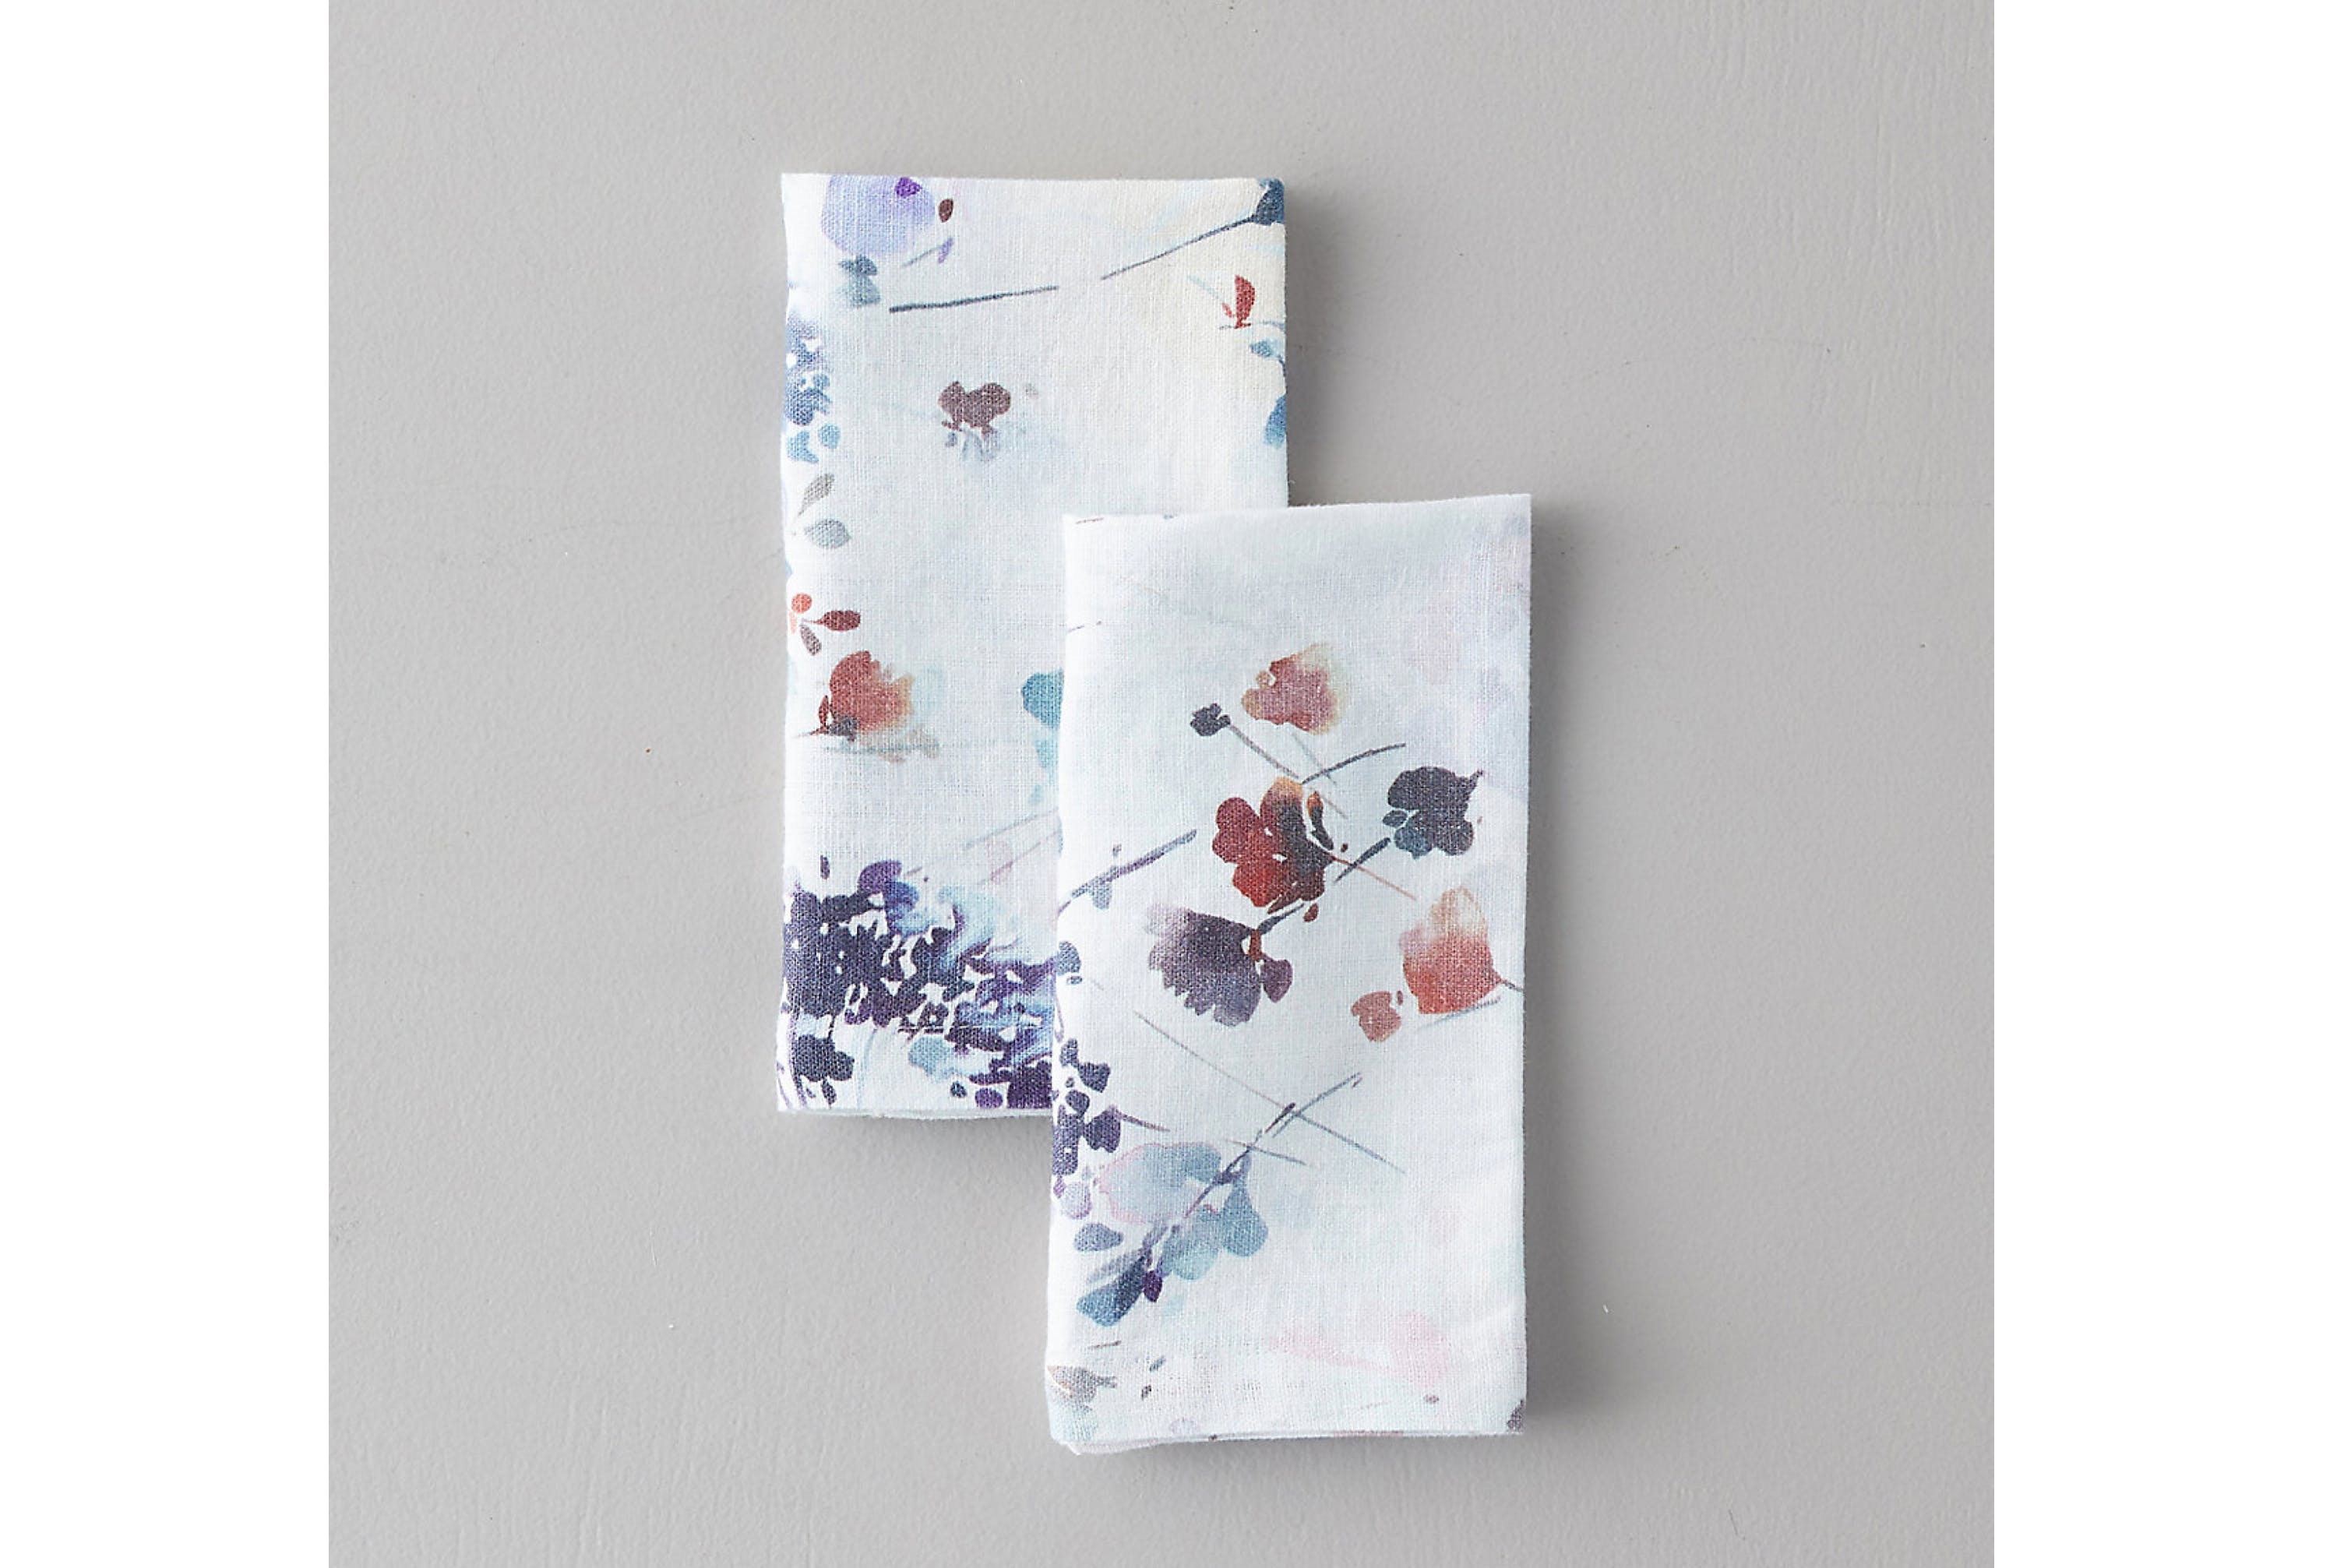 http://res.cloudinary.com/the-infatuation/image/upload/v1656122459/cms/features/the-best-cloth-napkins/Anthropologie.jpg